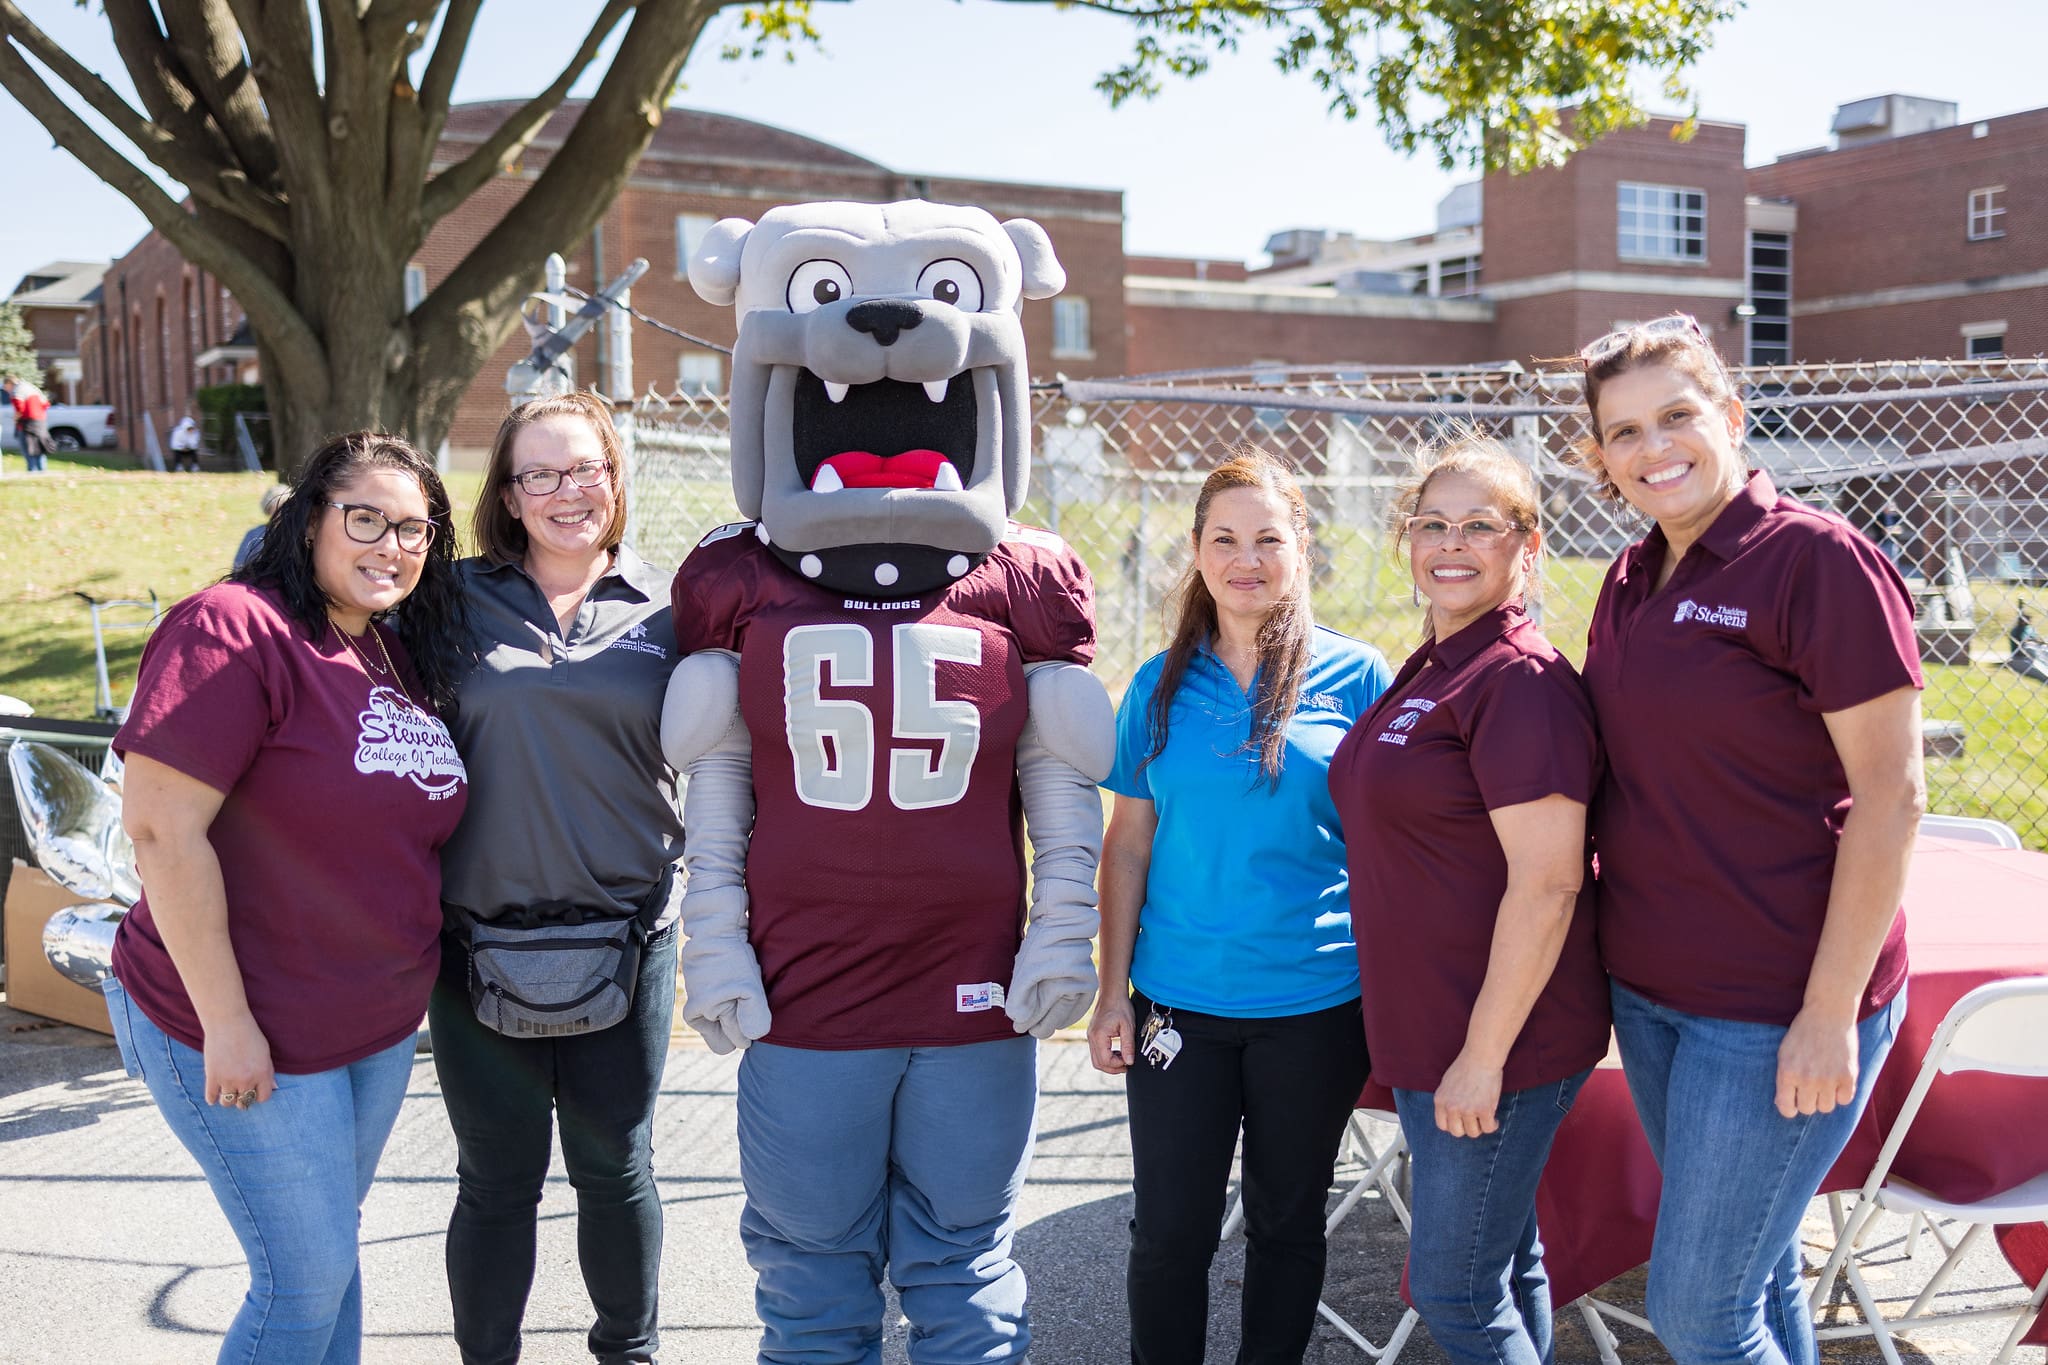 Champ and several staff at a College event